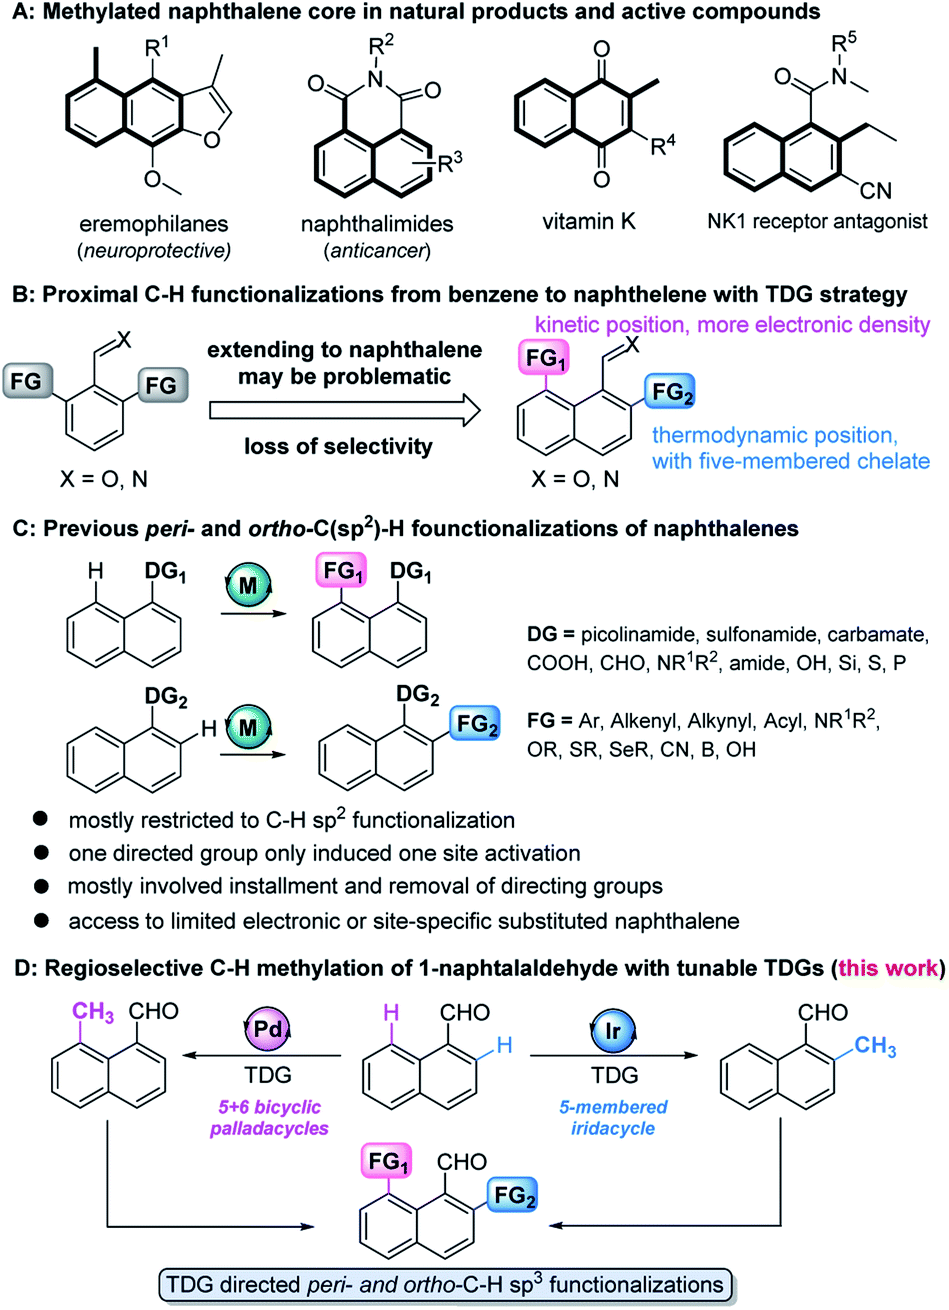 Overcoming peri - and ortho -selectivity in C–H methylation of  1-naphthaldehydes by a tunable transient ligand strategy - Chemical Science  (RSC Publishing) DOI:10.1039/D1SC05899A